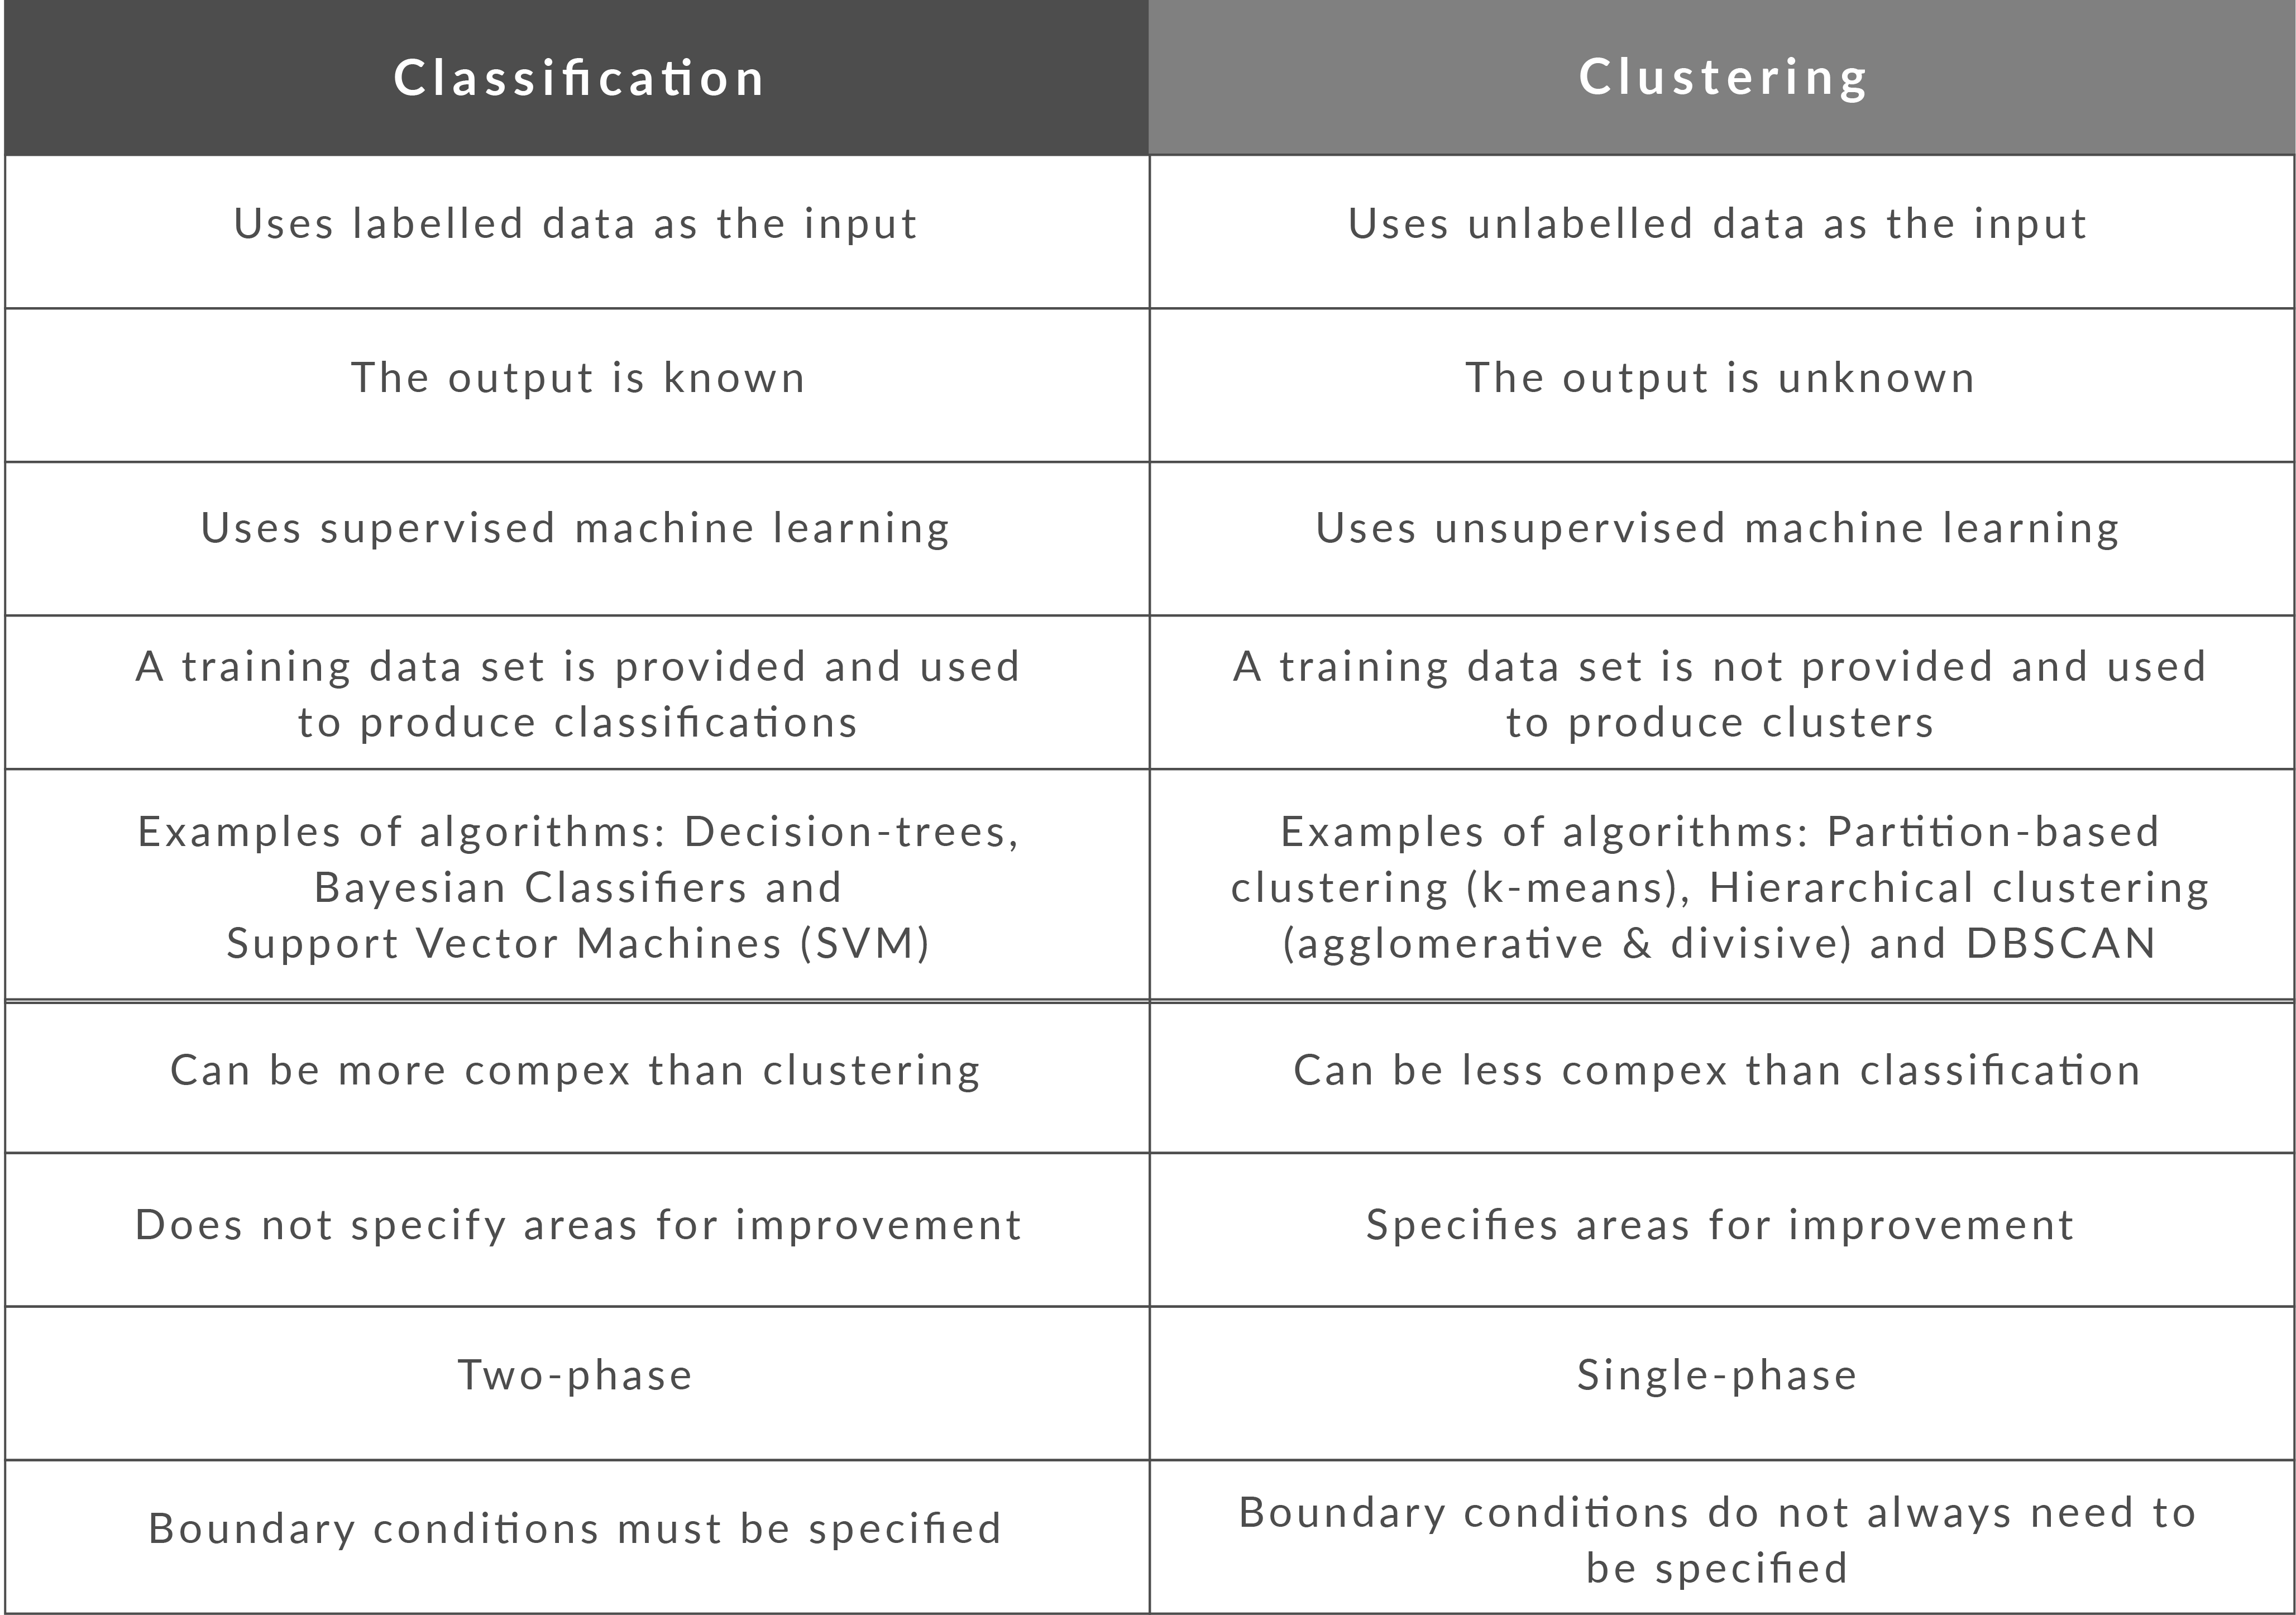 Why use clustering instead of classification?